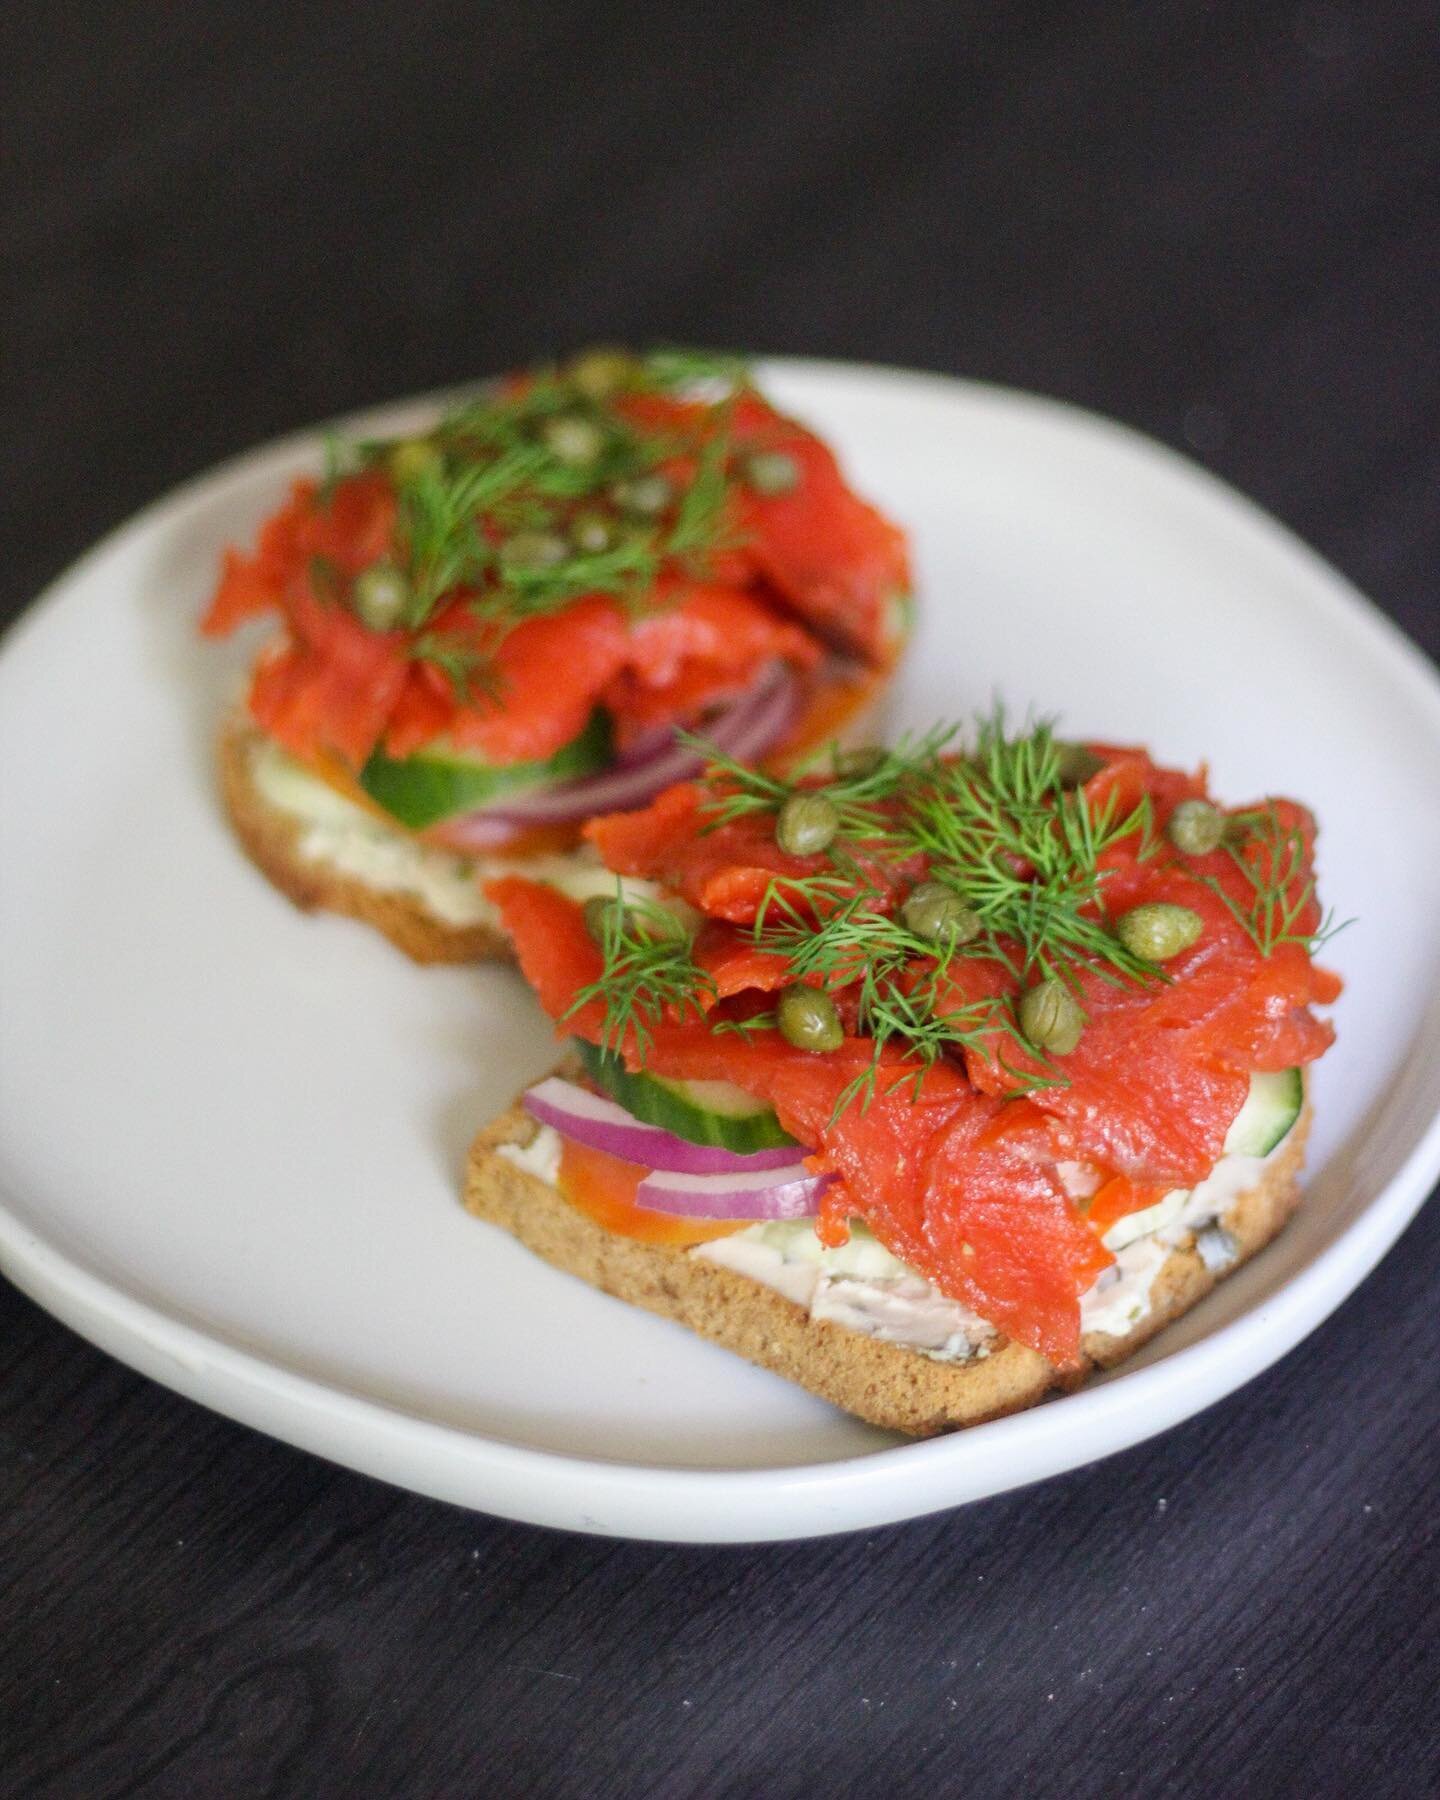 FENNEL CURED SALMON turned into a paleo open faced lox toast. It&rsquo;s so easy to cure your own salmon and it&rsquo;s cheaper than buying it premade but it takes a little patience 🤑 Recipe below ⬇️⬇️⬇️
&bull;
INGREDIENTS
2 fillets wild salmon
1/2 